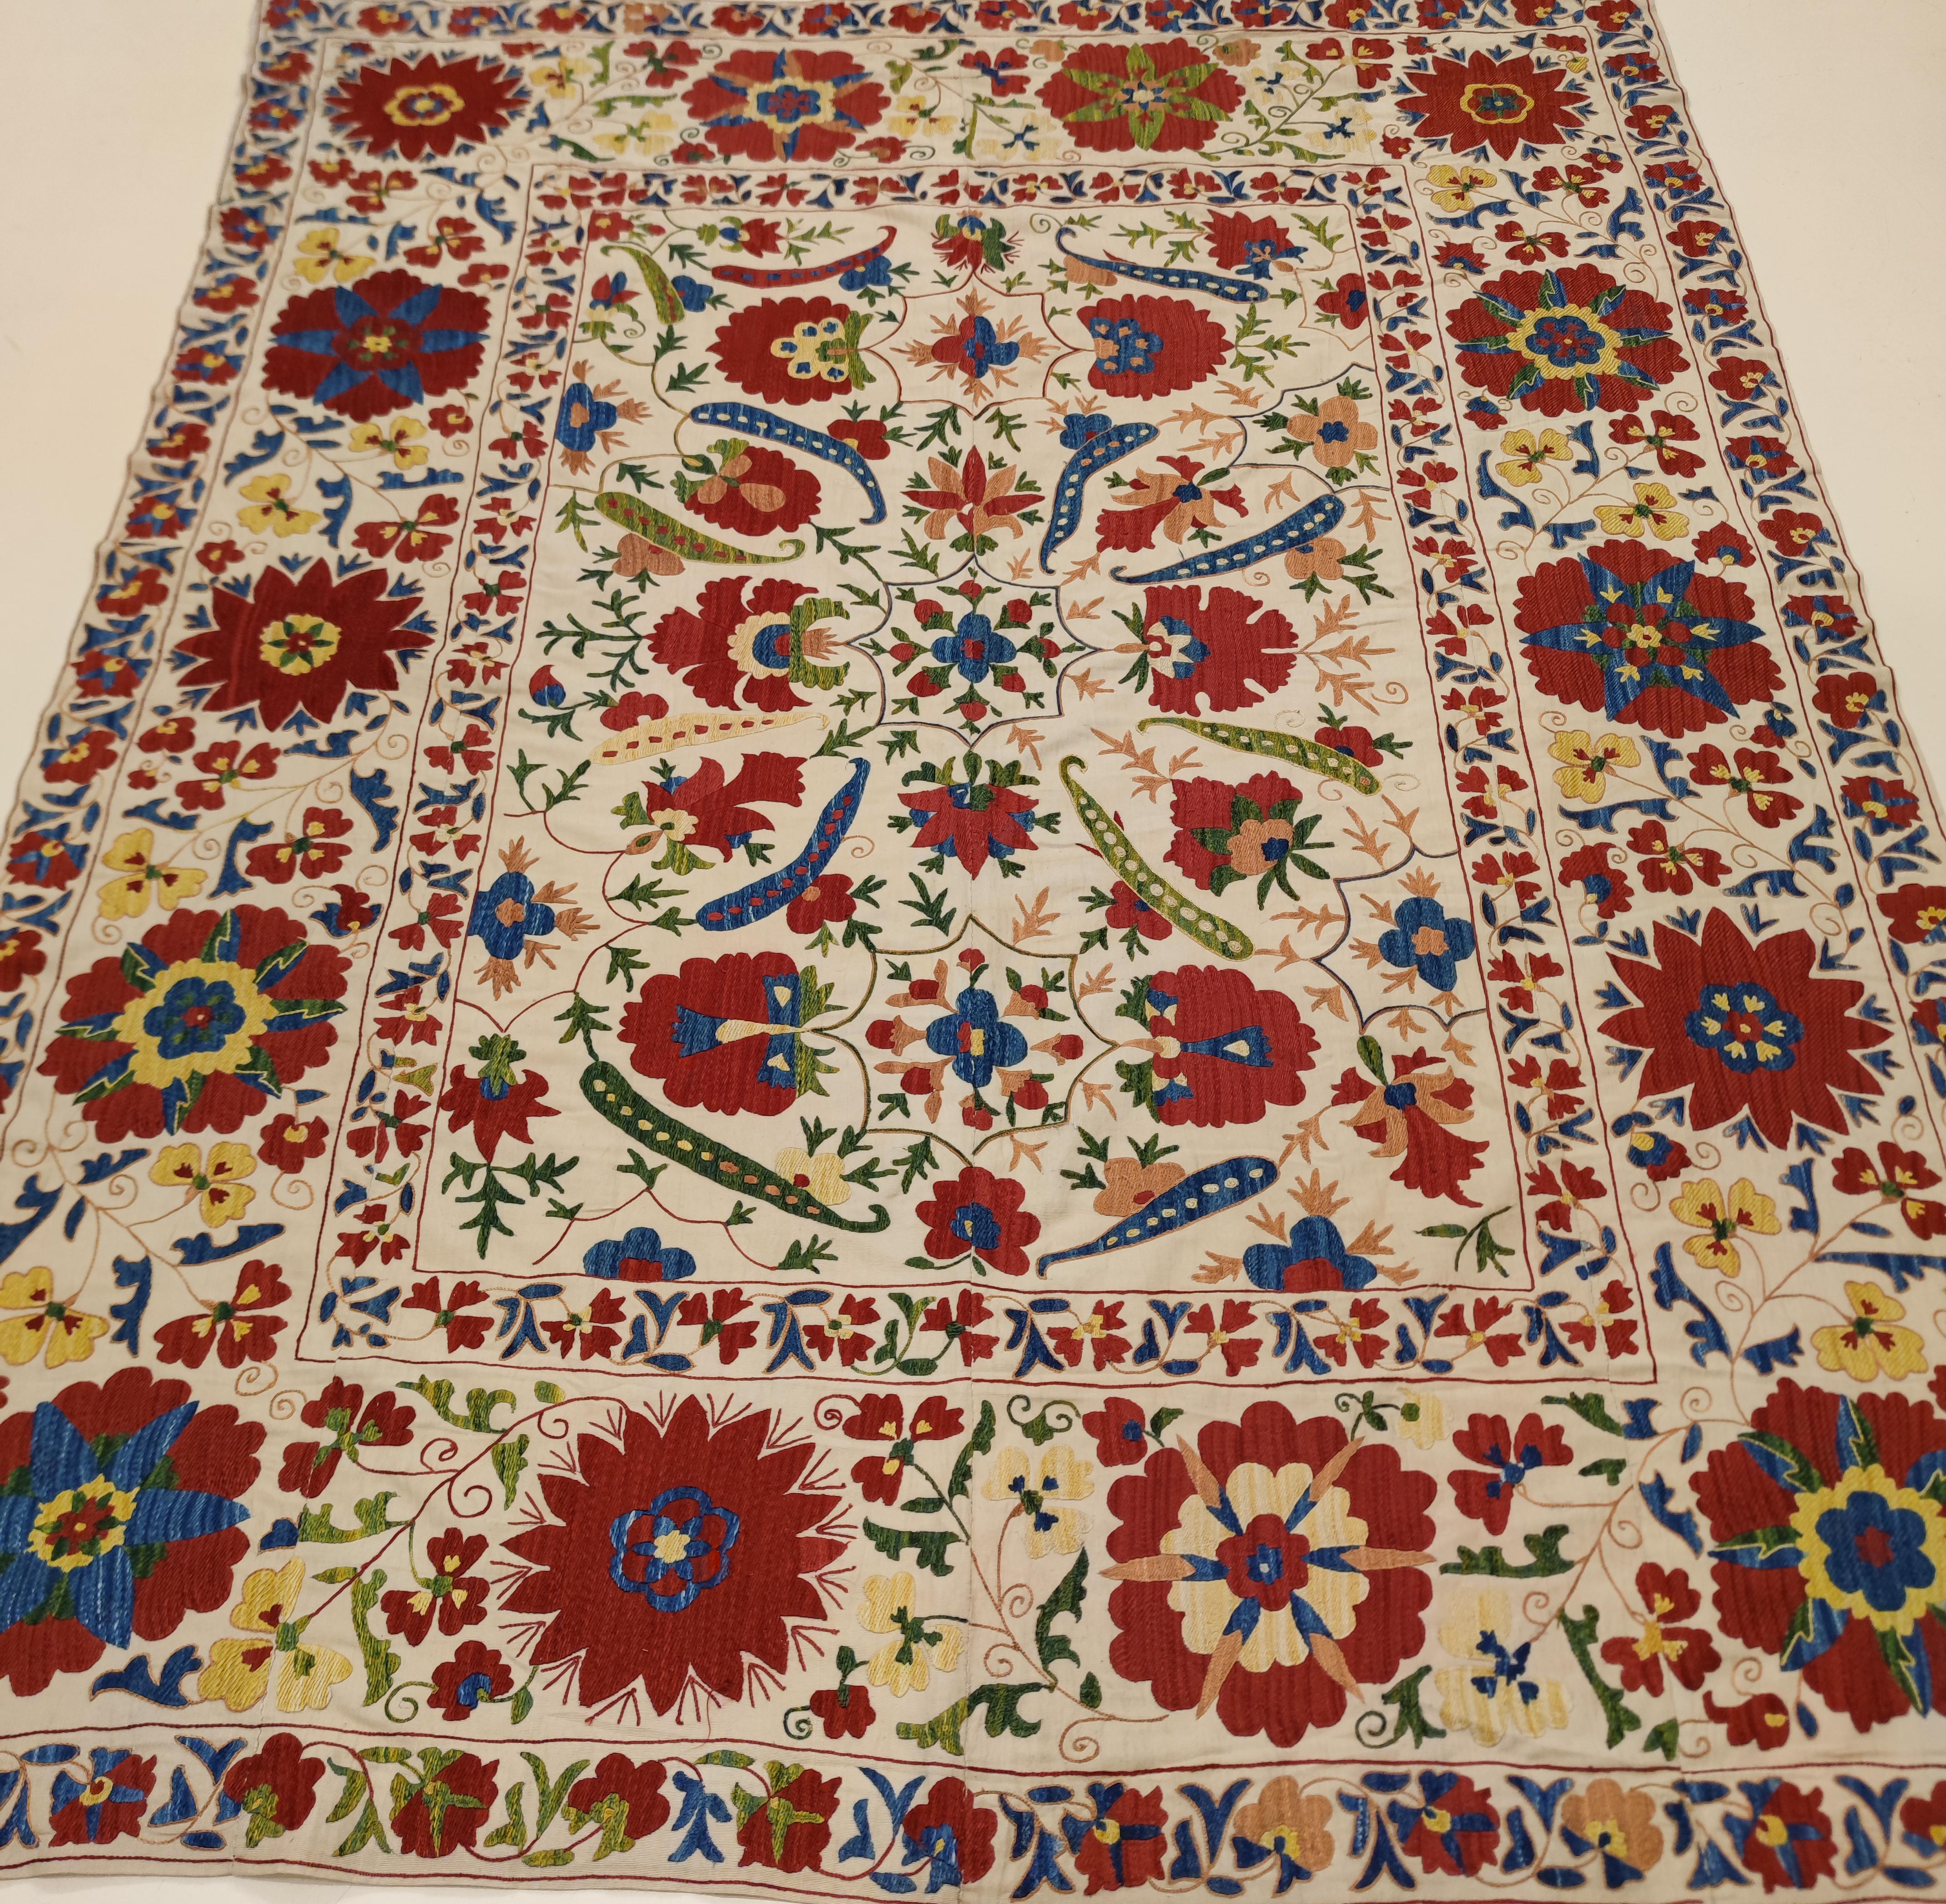 The Suzani textiles from Uzbekistan represent the most refined and elegant manifestation of Central Asian textile art tradition. Silk on cotton embroideries such as this one were woven by young women in order to enrich their dowry, which is why they